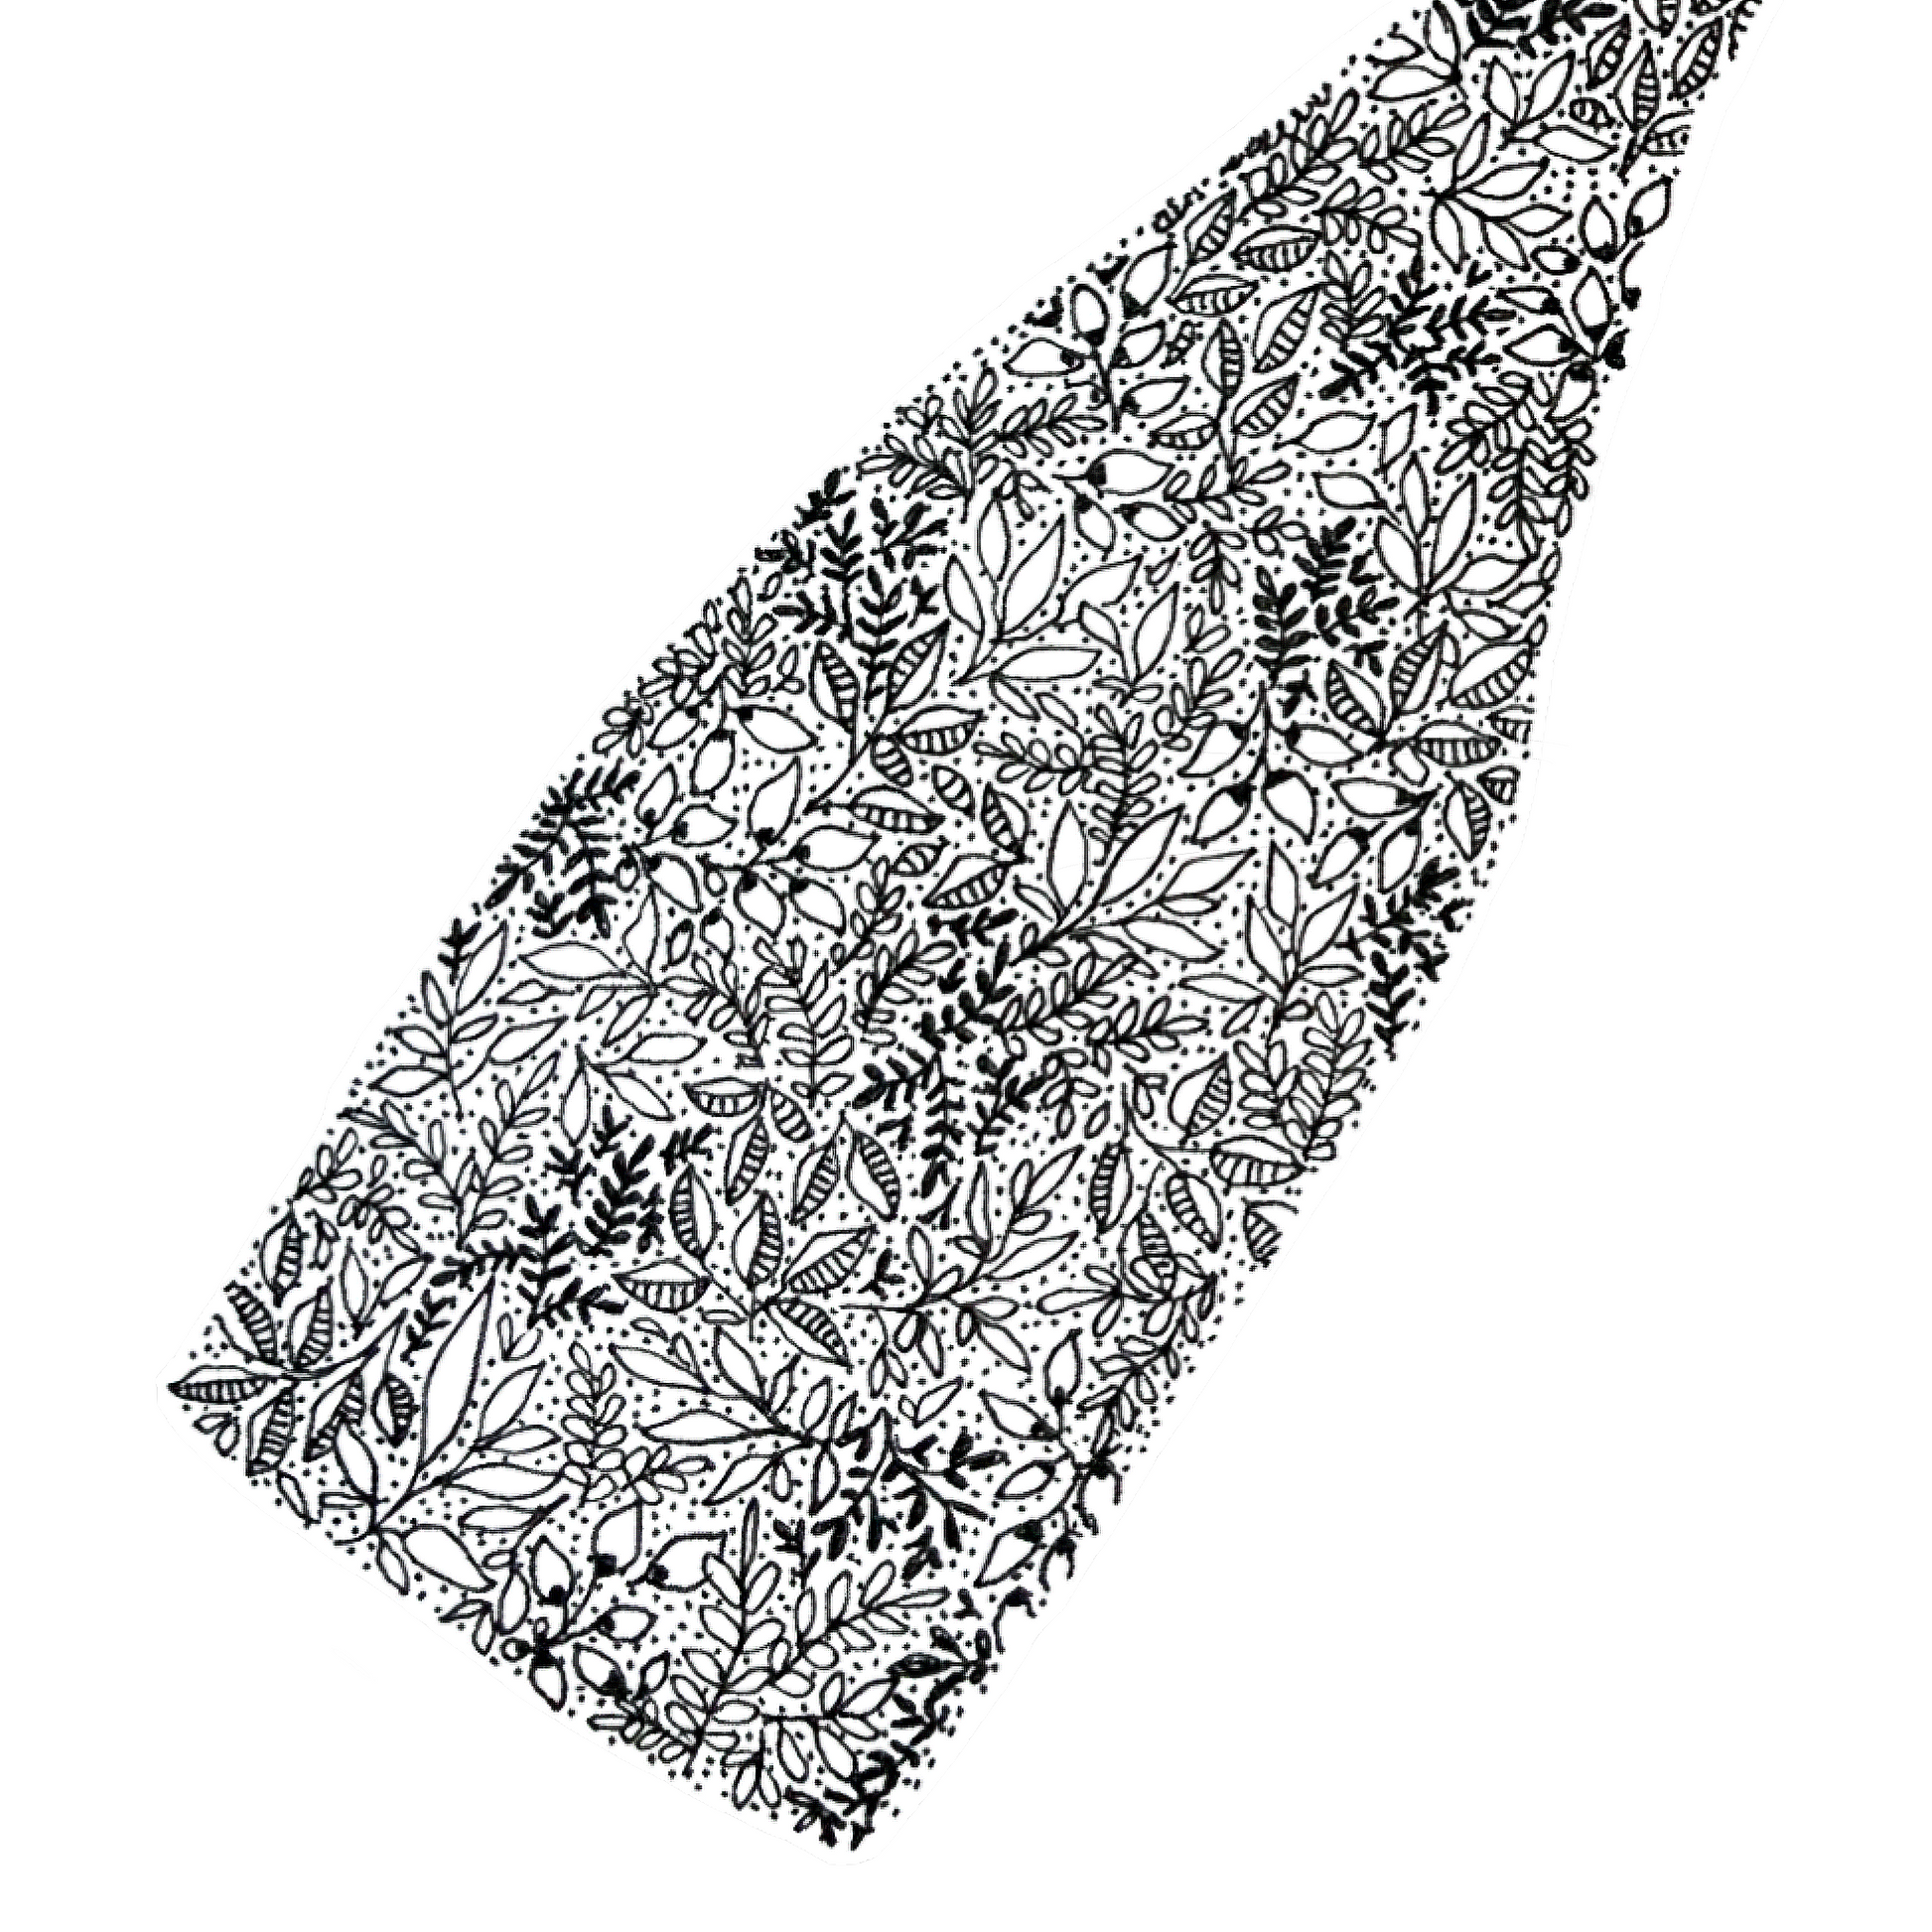 Image shows bottom half as a close up picture of a bottle of champagne. Image is made entirely of black and white flowers. image is showing great detail. Illustration is set on a white background.